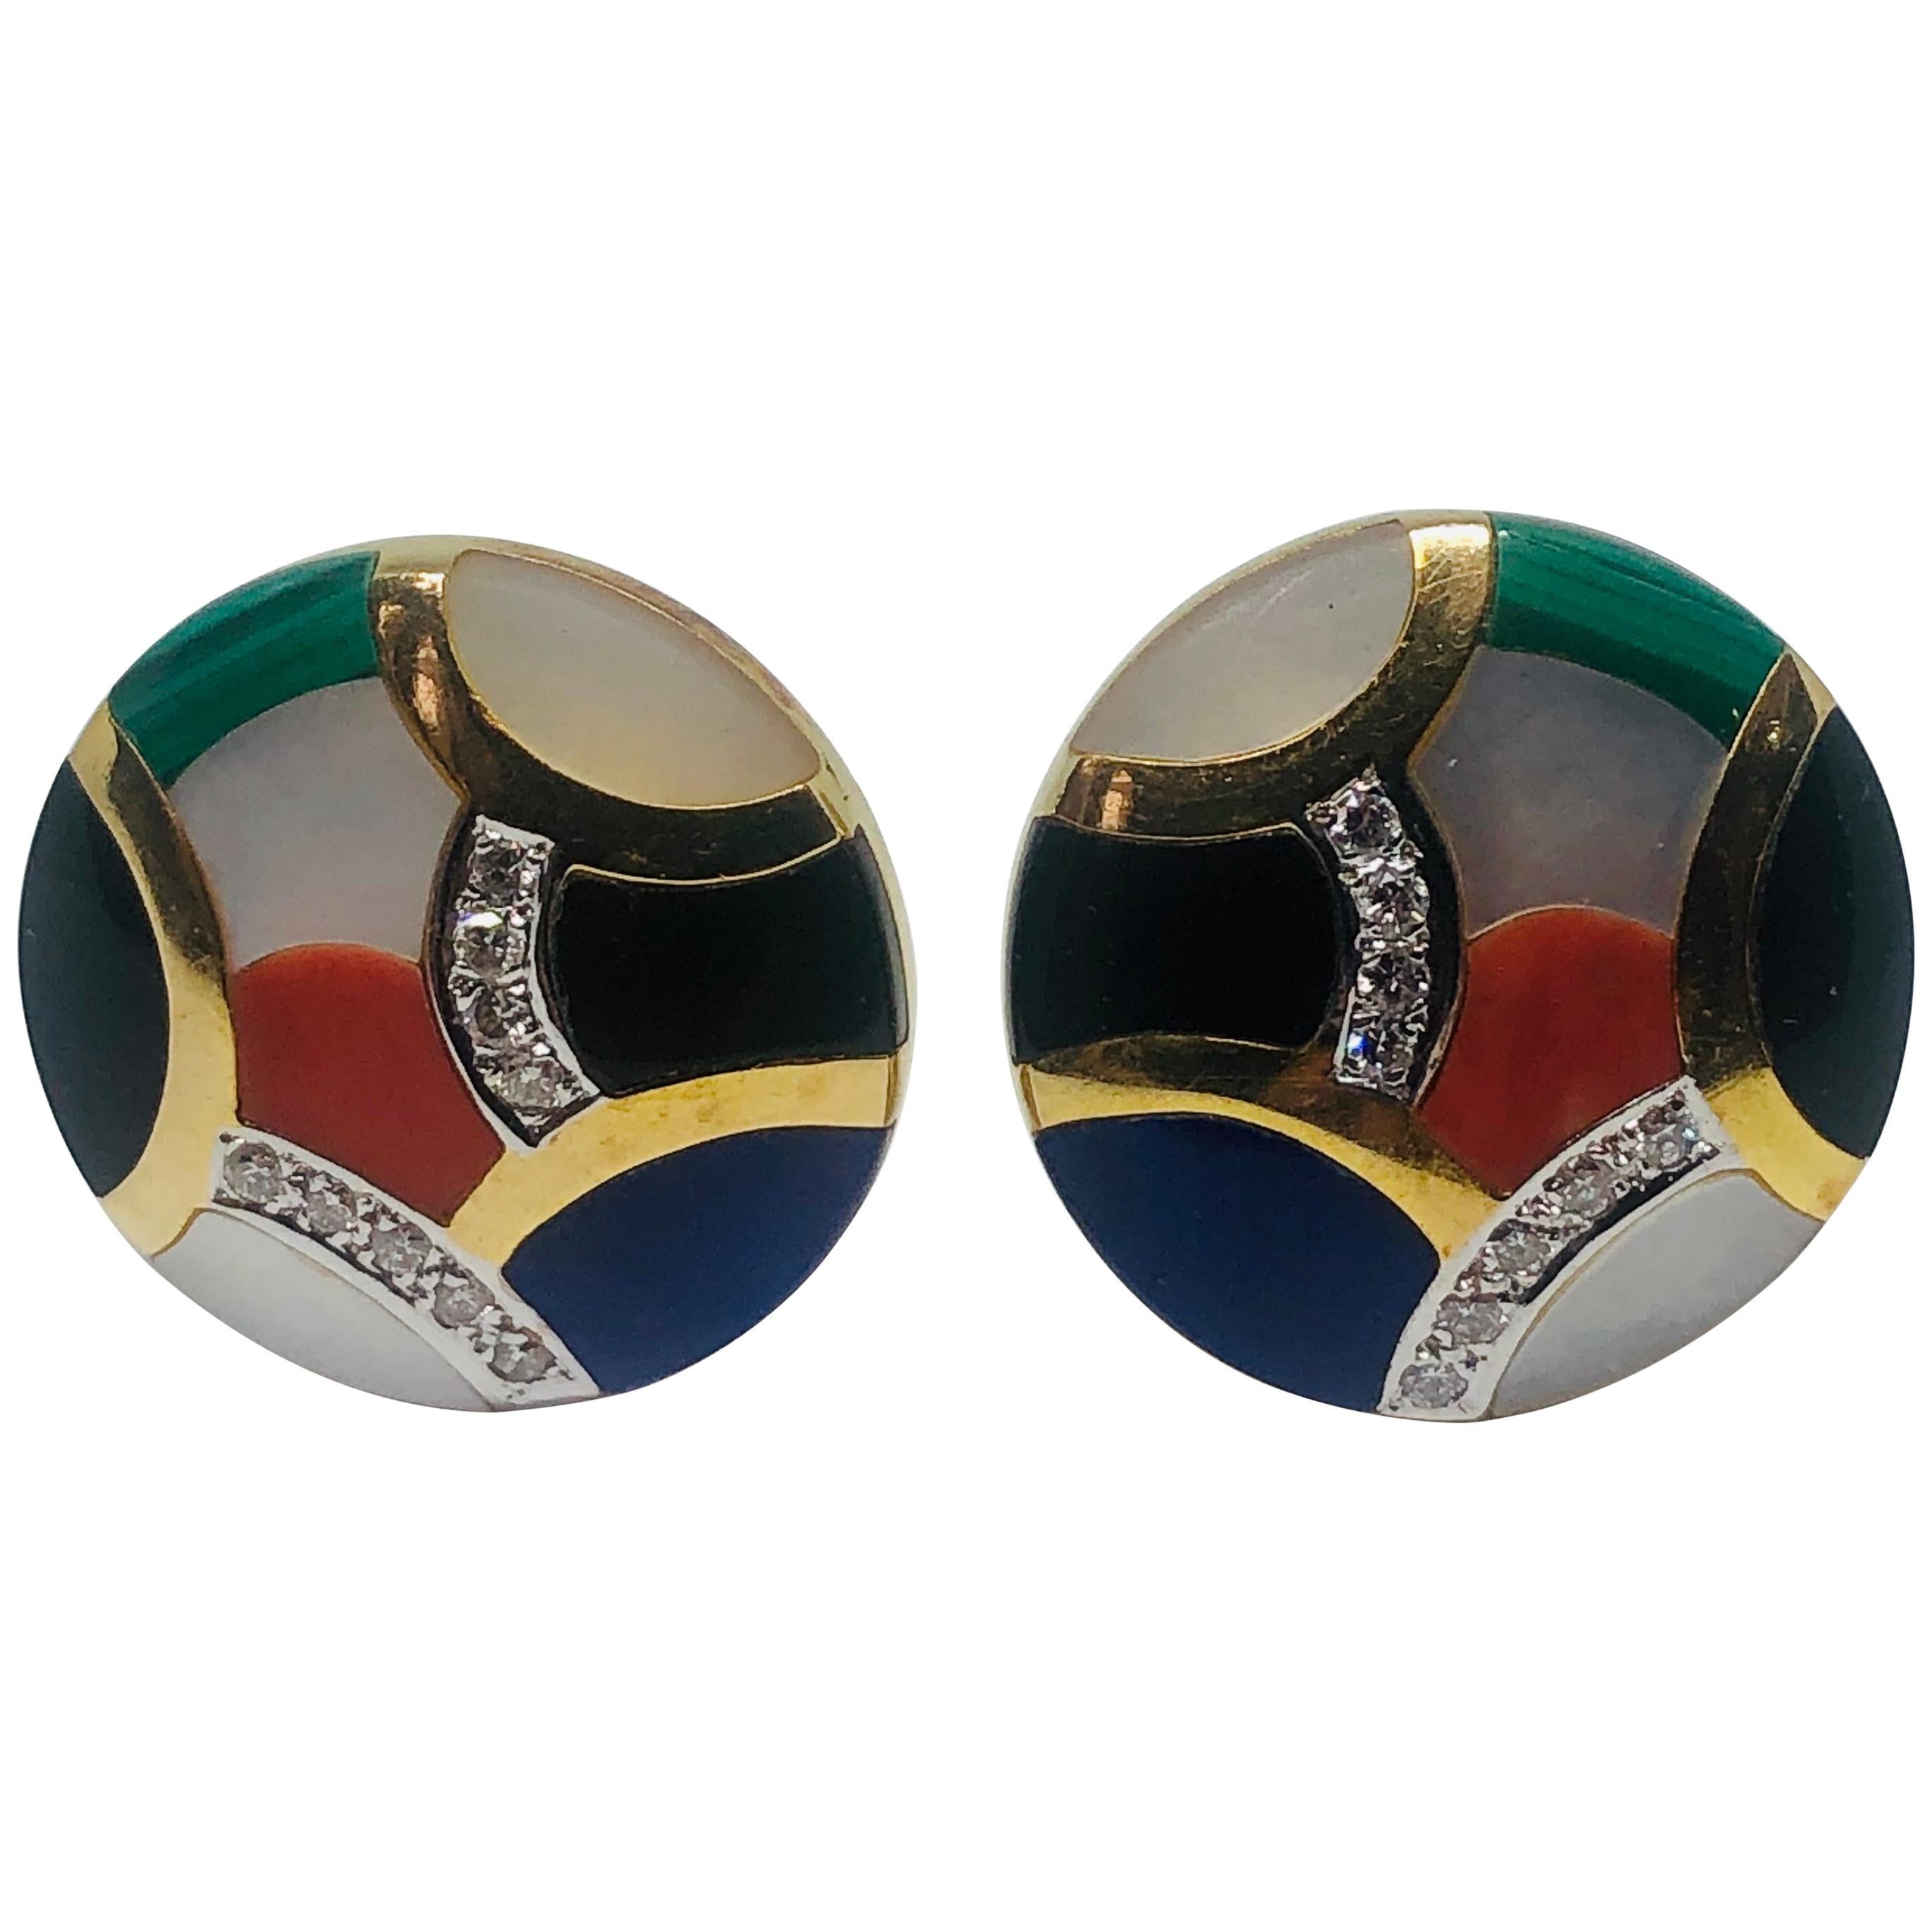 Asch Grossbardt Diamond, Enamel 14kt Yellow Gold Disc Earrings with post and clip fittings. Works of art for your ears.

Jerome Grossbardt and Larry Asch, two jewellers whose ancestors encompassed over 200 years in the jewellery business, co-founded